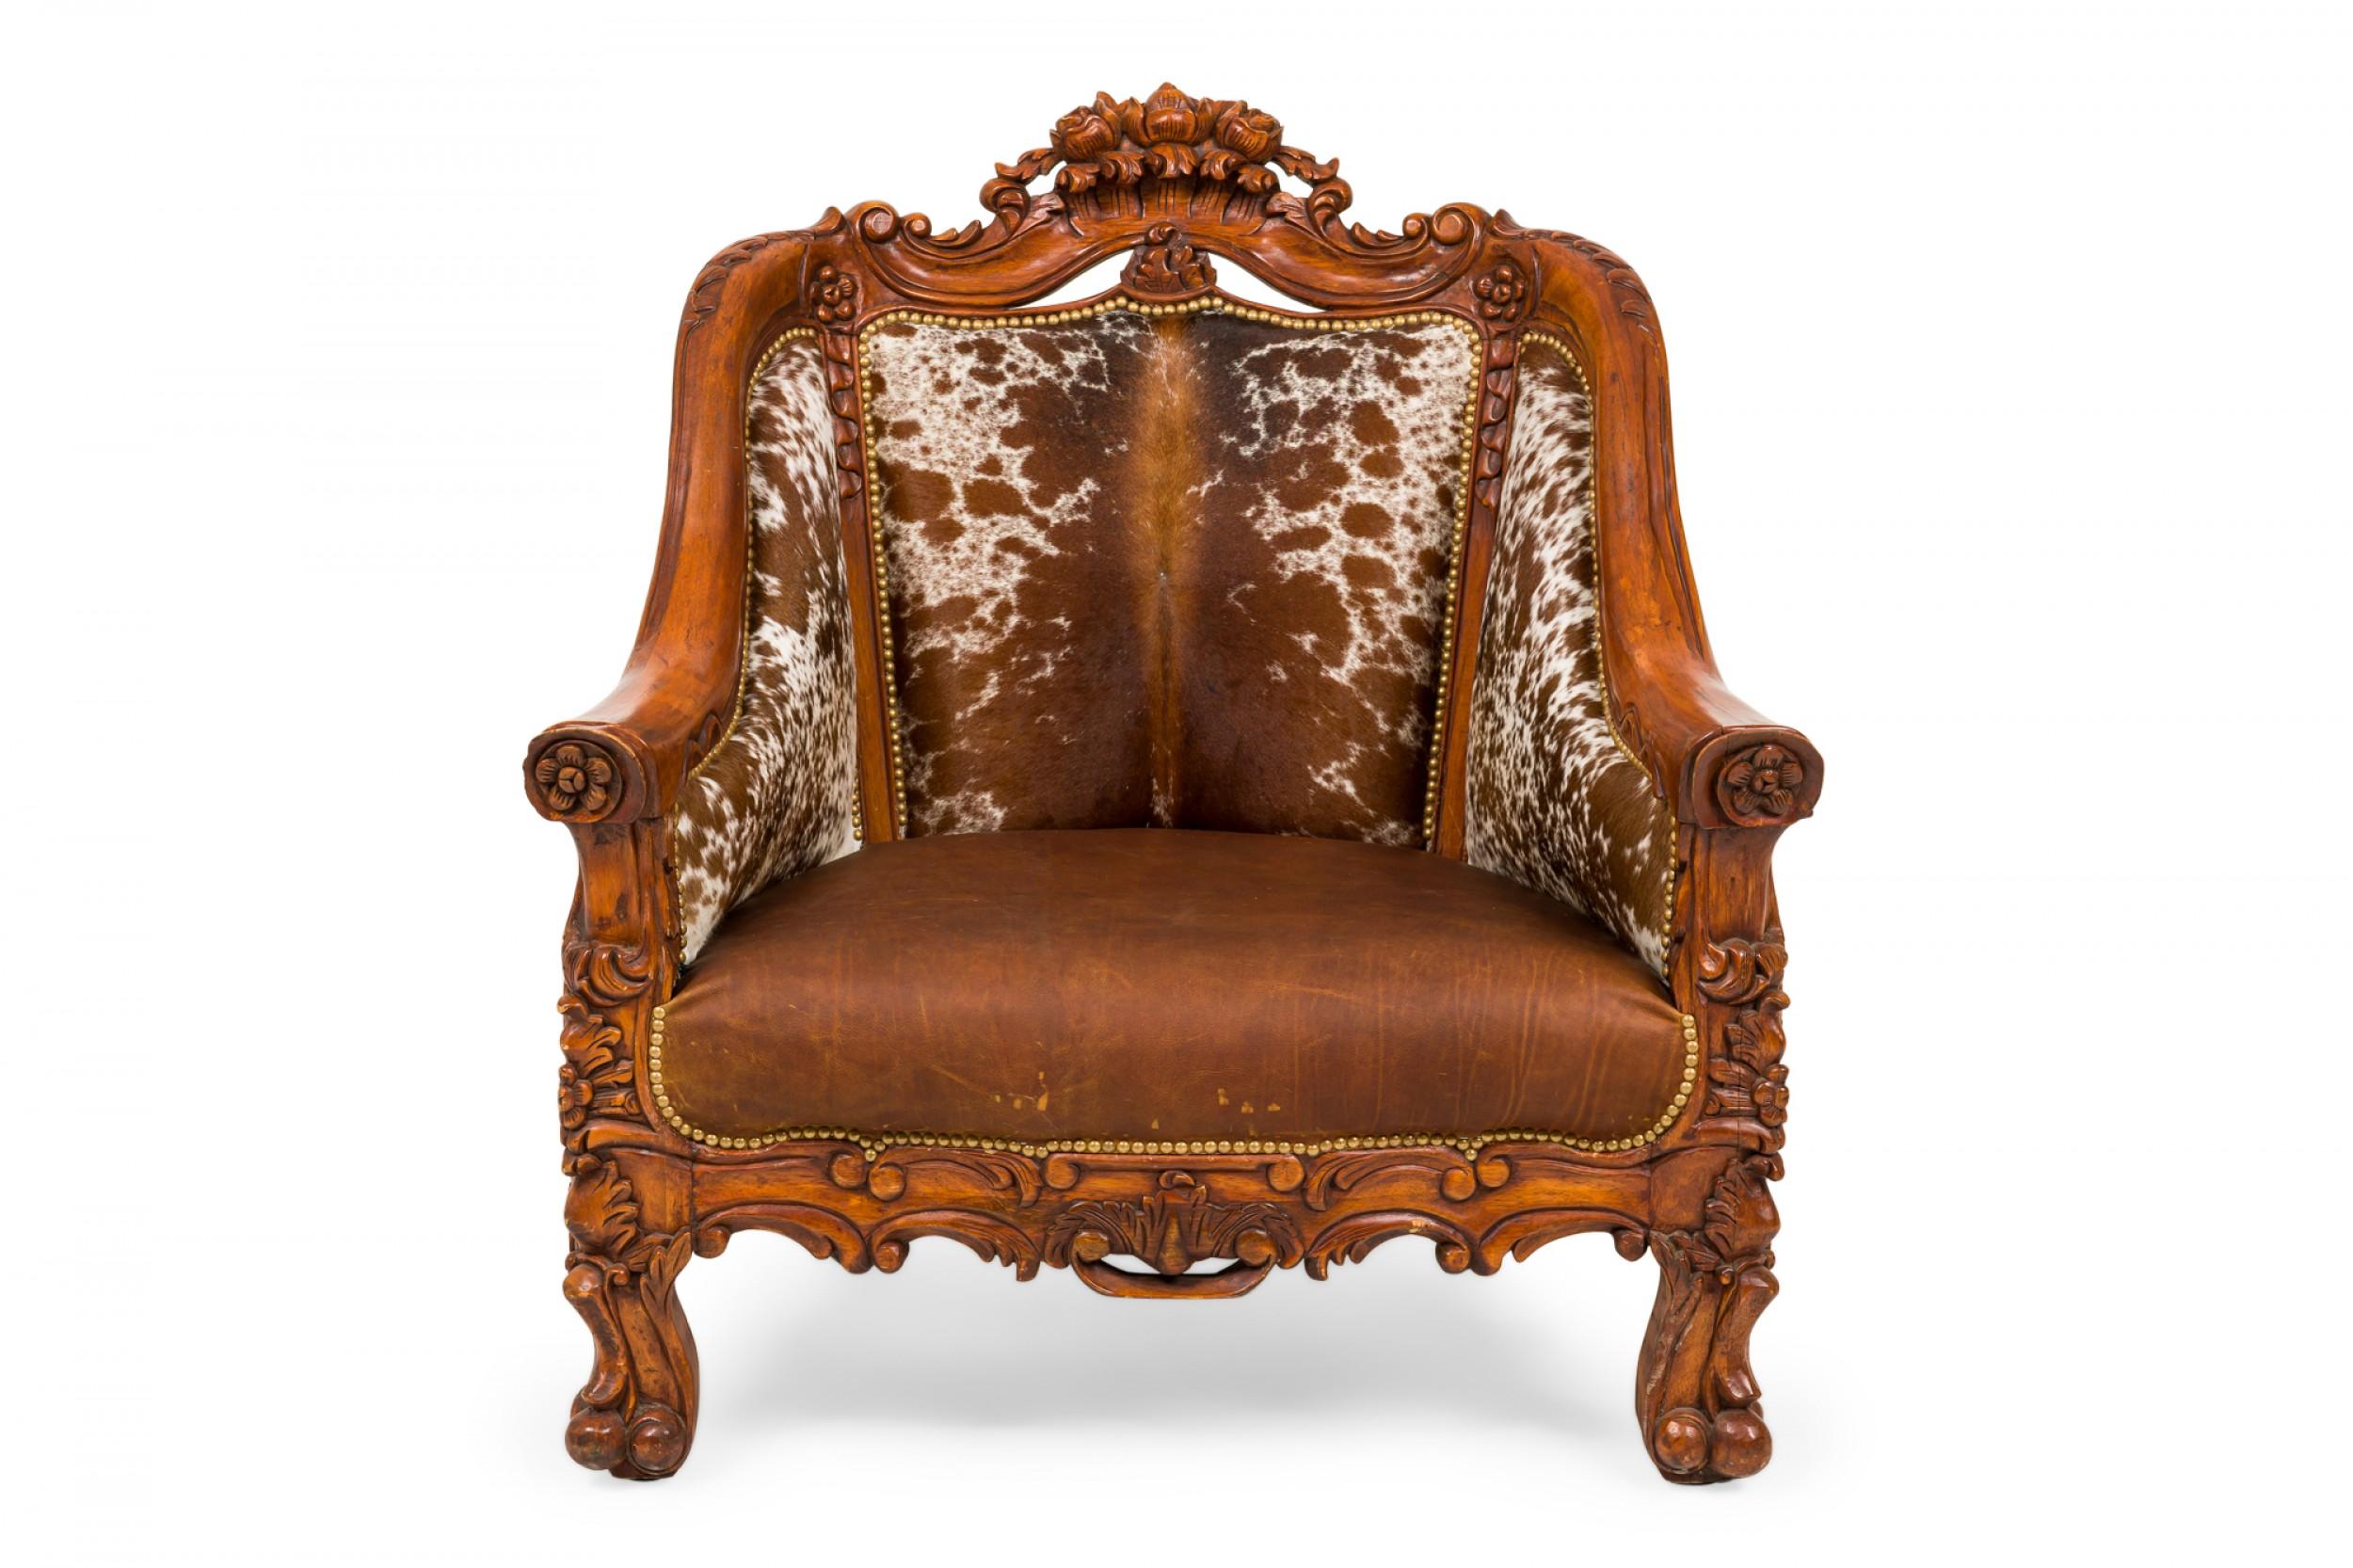 Pair of Rustic American custom arm / lounge chairs with carved walnut frames featuring a floral crest, with cowhide backs and sides and a brown leather upholstered seat with decorative nailhead trim, resting on carved paw feet. (priced as pair).